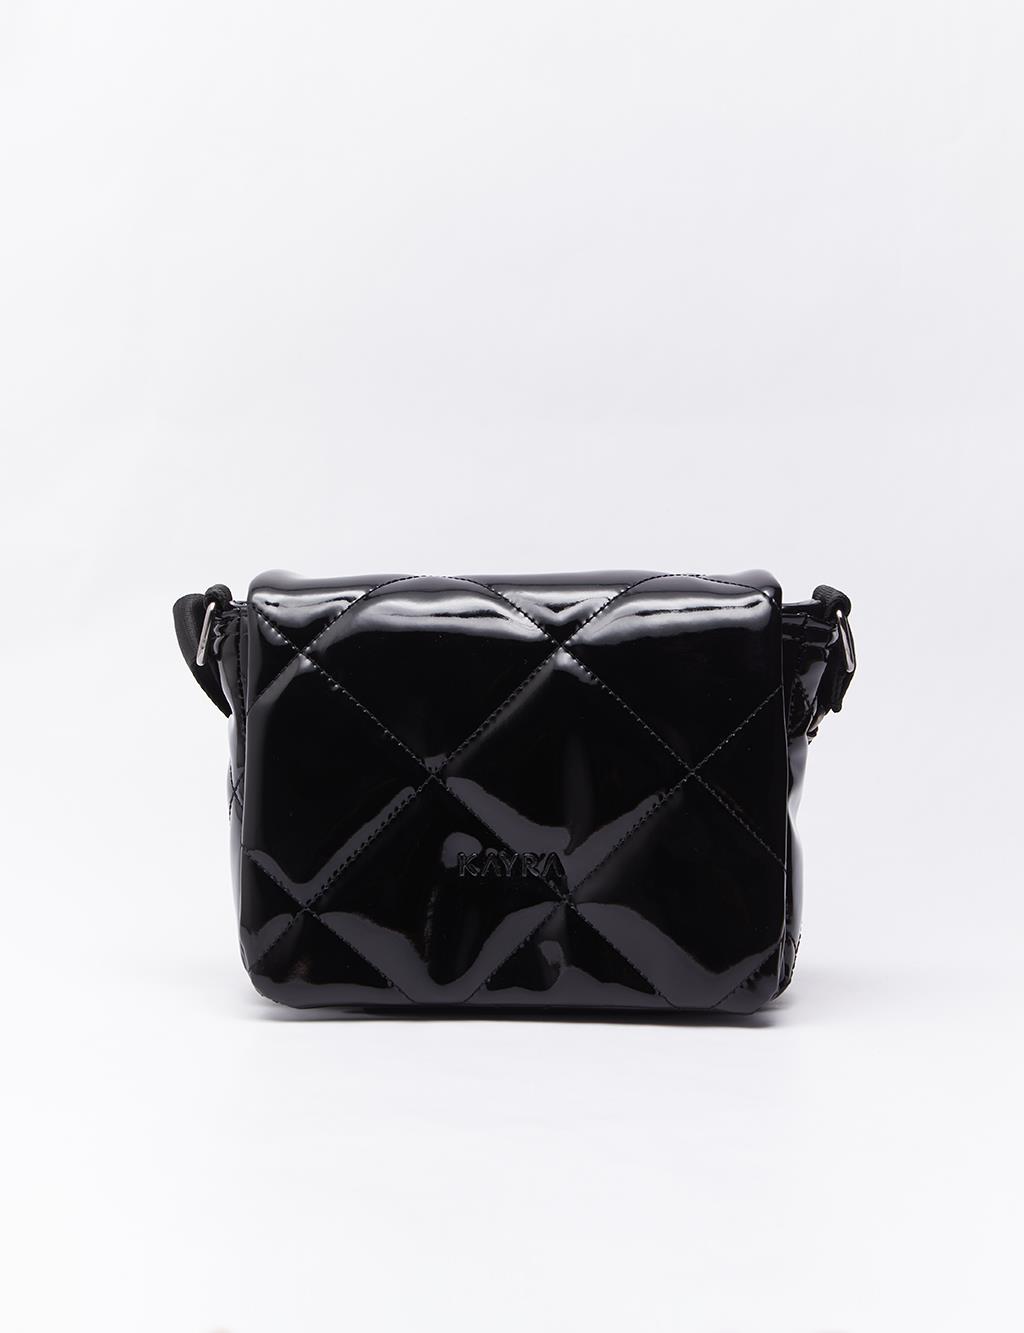 Quilted Patent Leather Bag Black